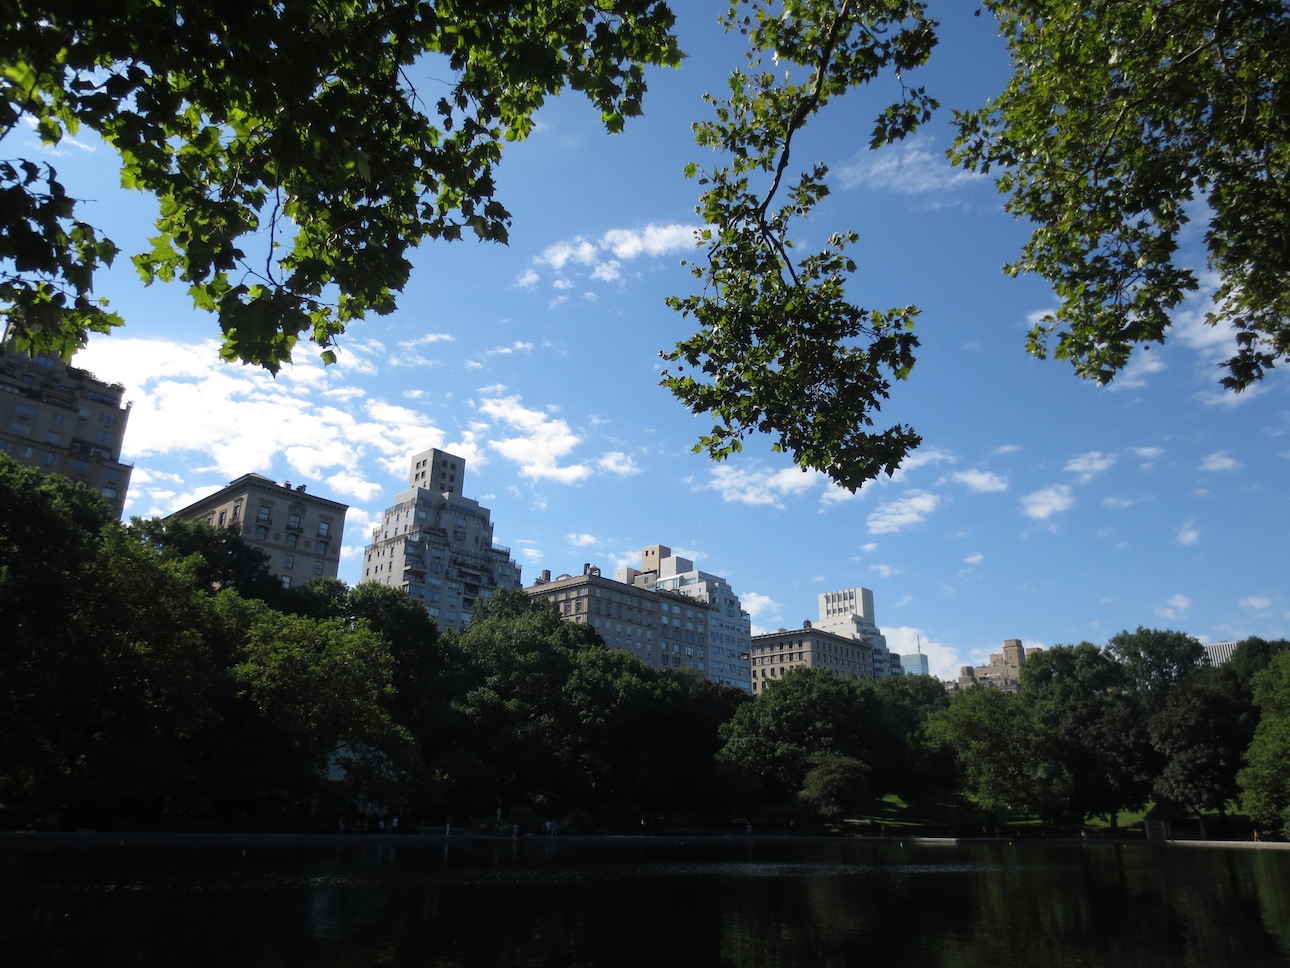 Upper East Side view from Central Park.